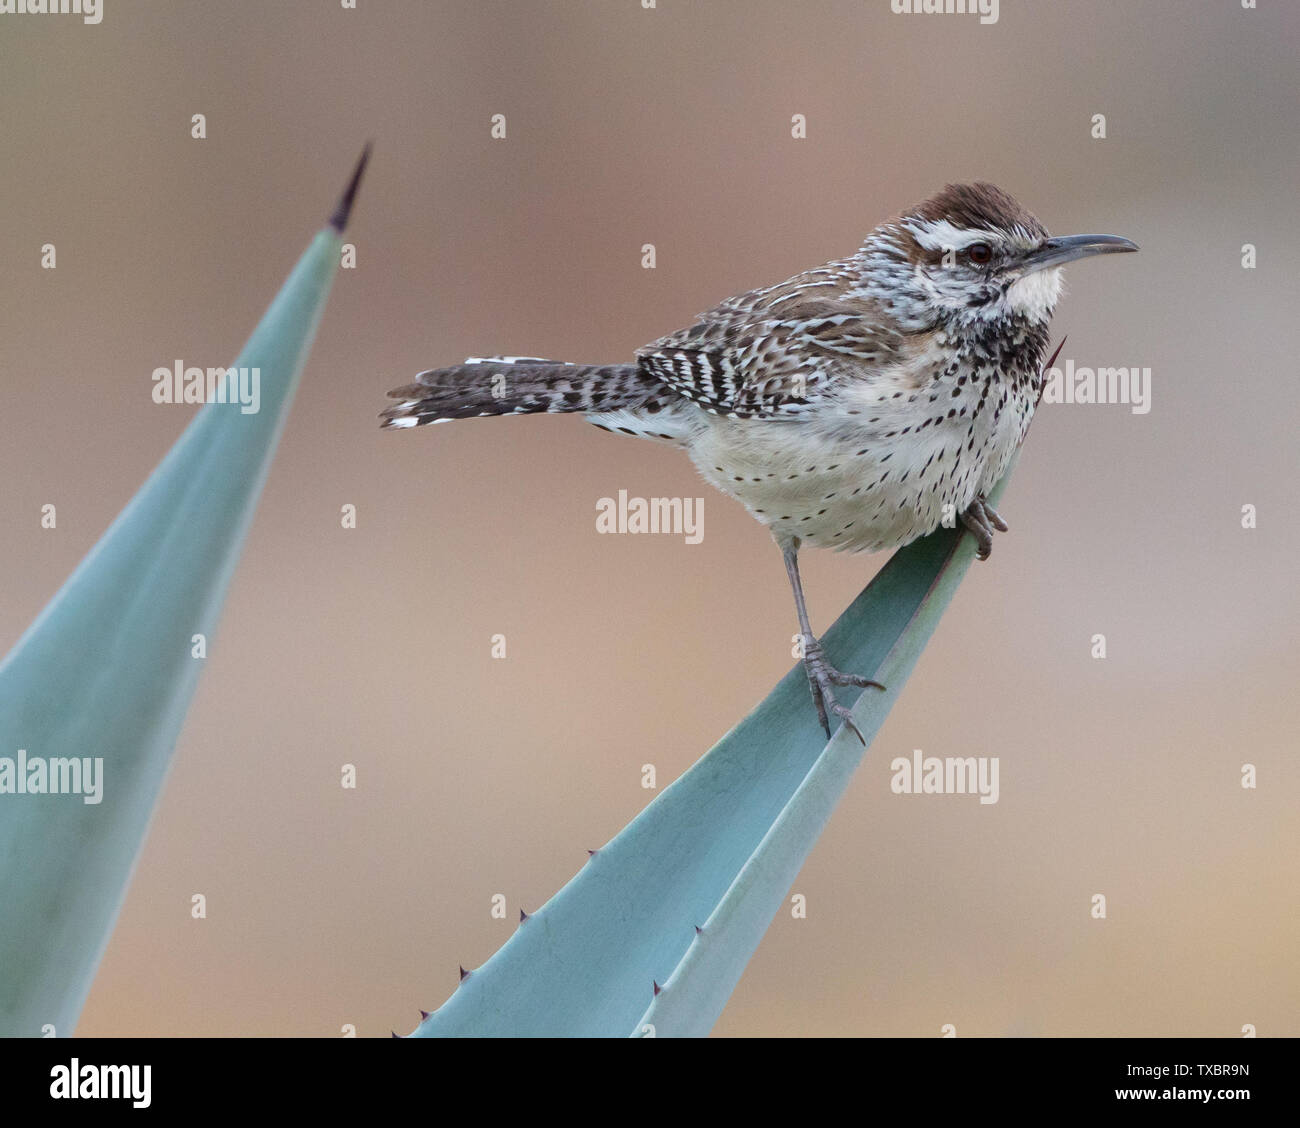 A cactus wren (Campylorhynchus brunneicapillus) sits on the end of an aloe leaf in Borrego Springs, California Stock Photo